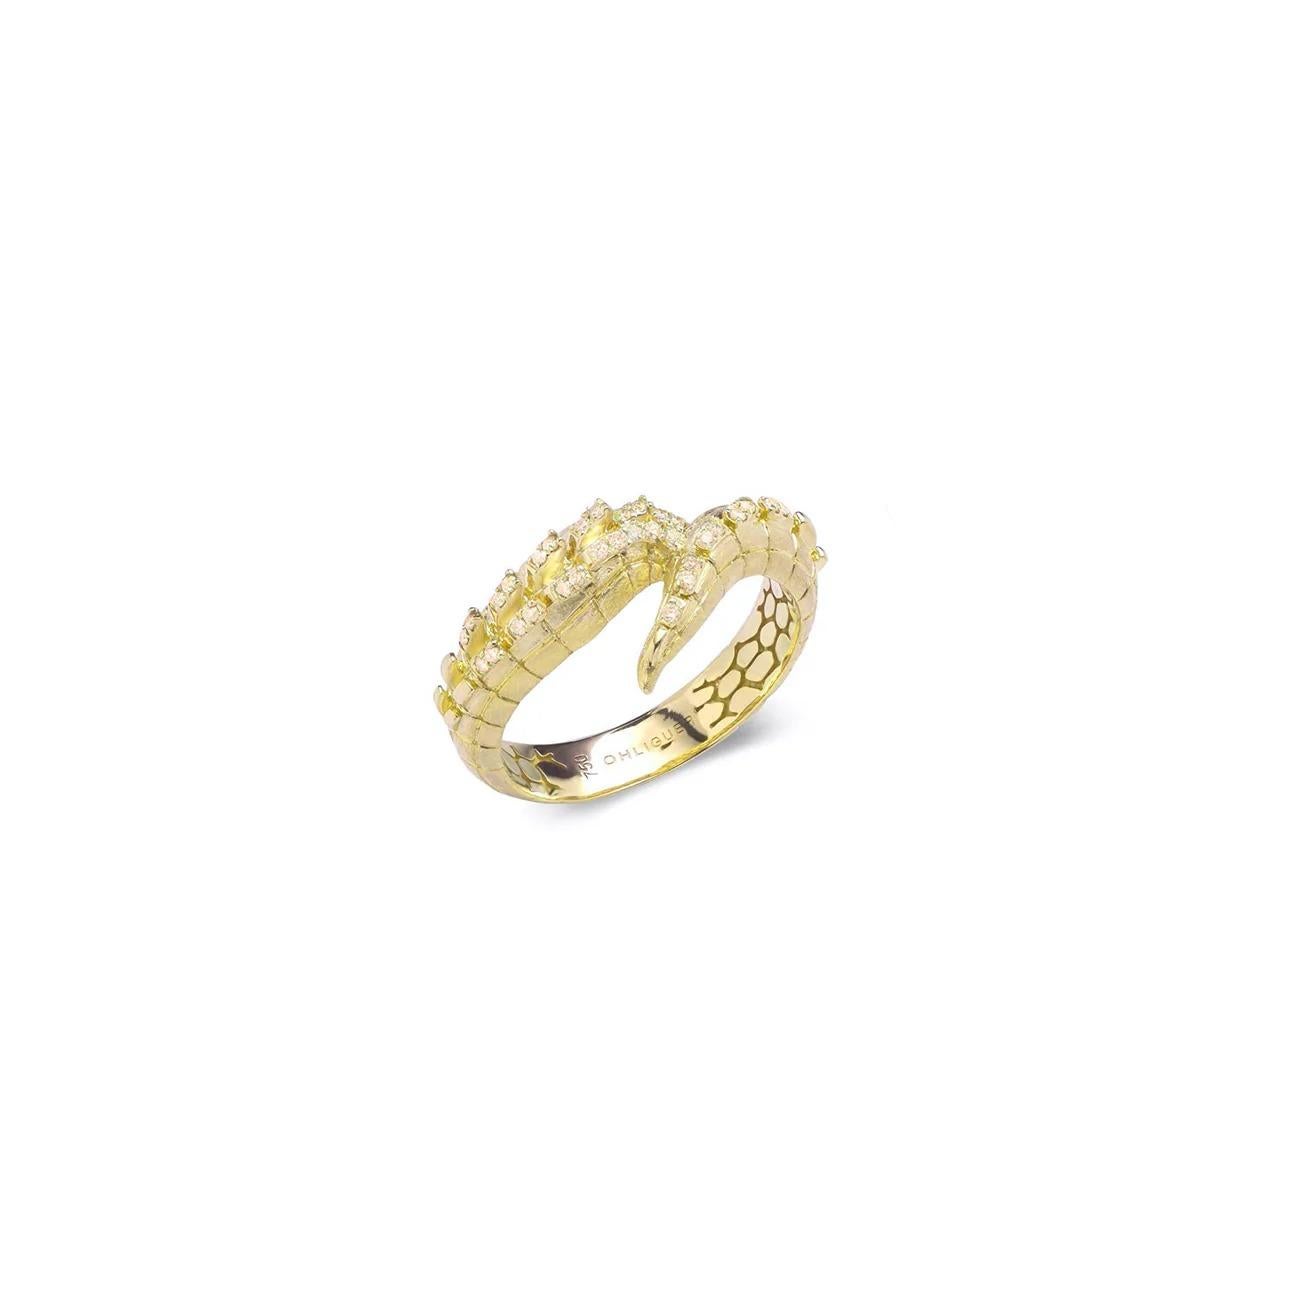 For Sale:  Croc Tail Ring in 18ct White Gold with Diamonds 4